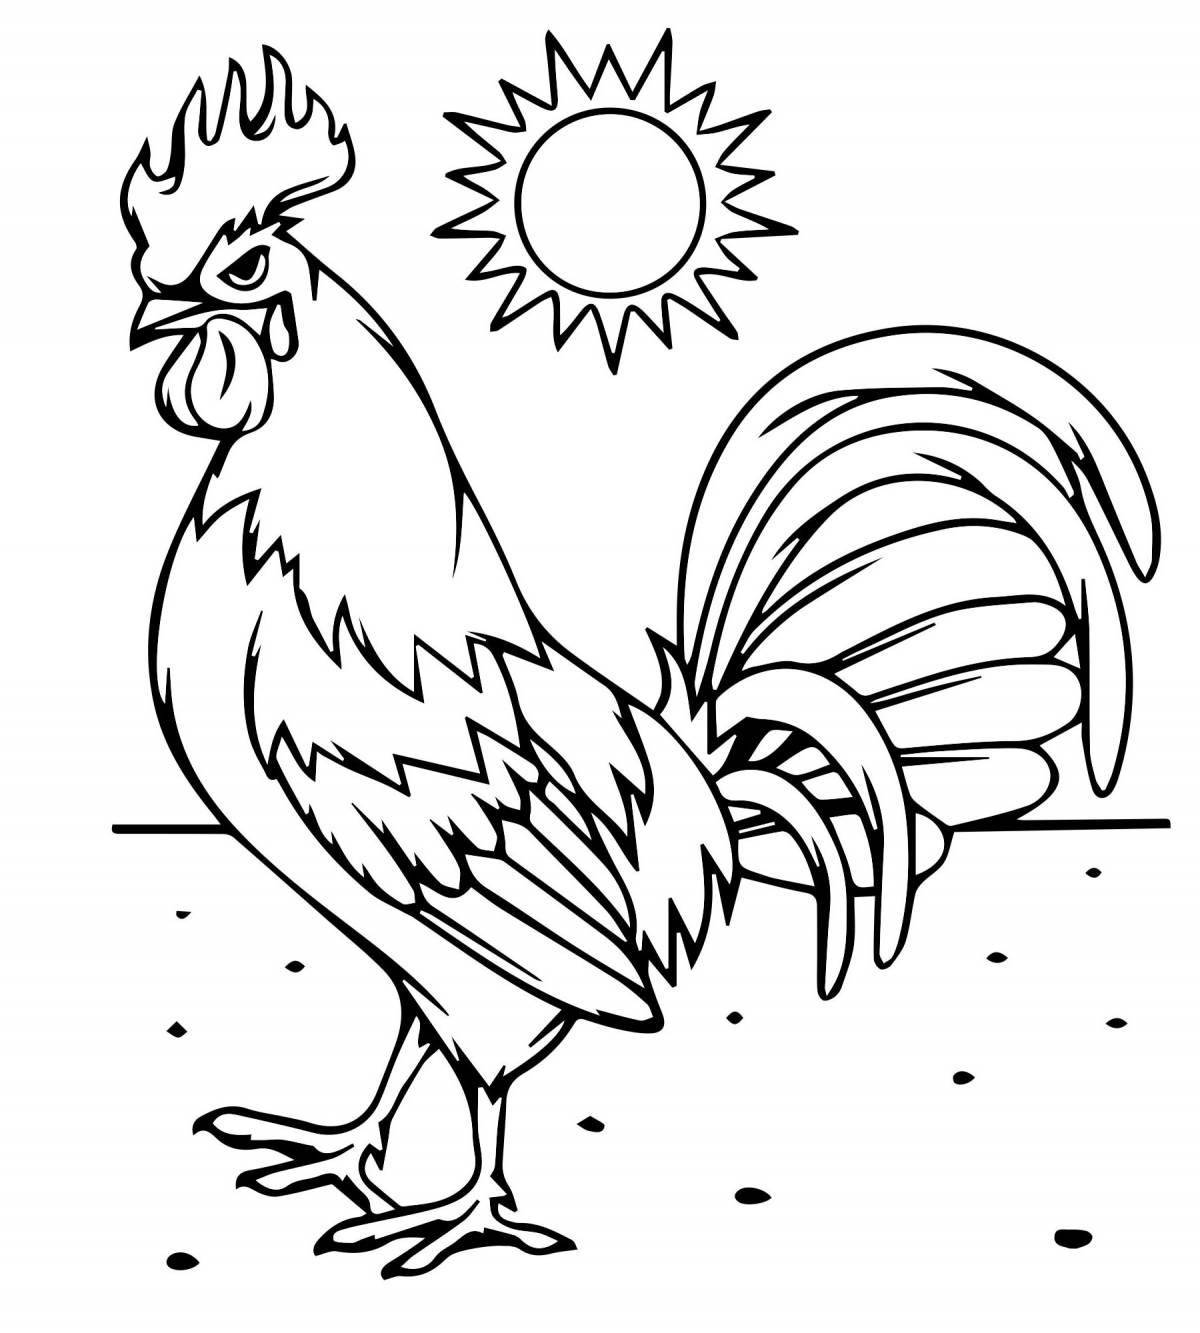 A fun rooster coloring book for 3-4 year olds